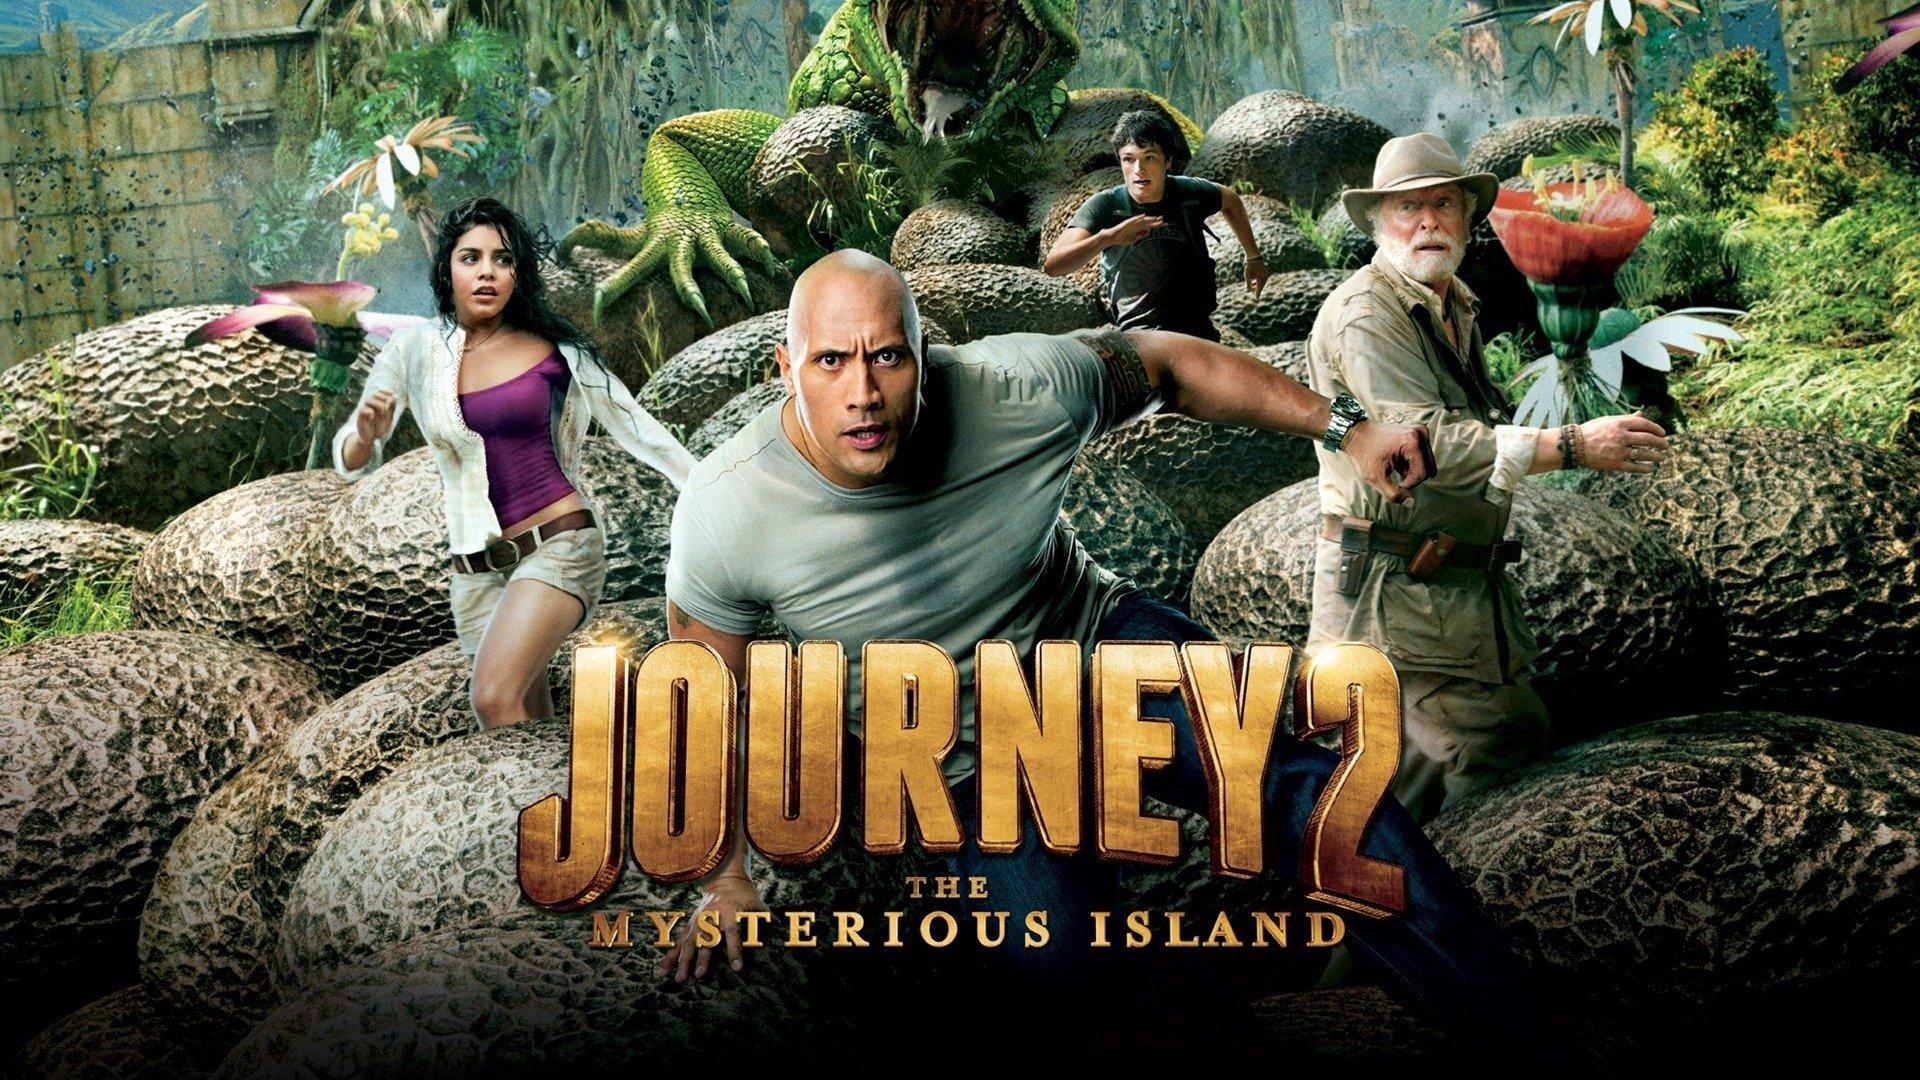 journey 2 the mysterious island kailani and sean